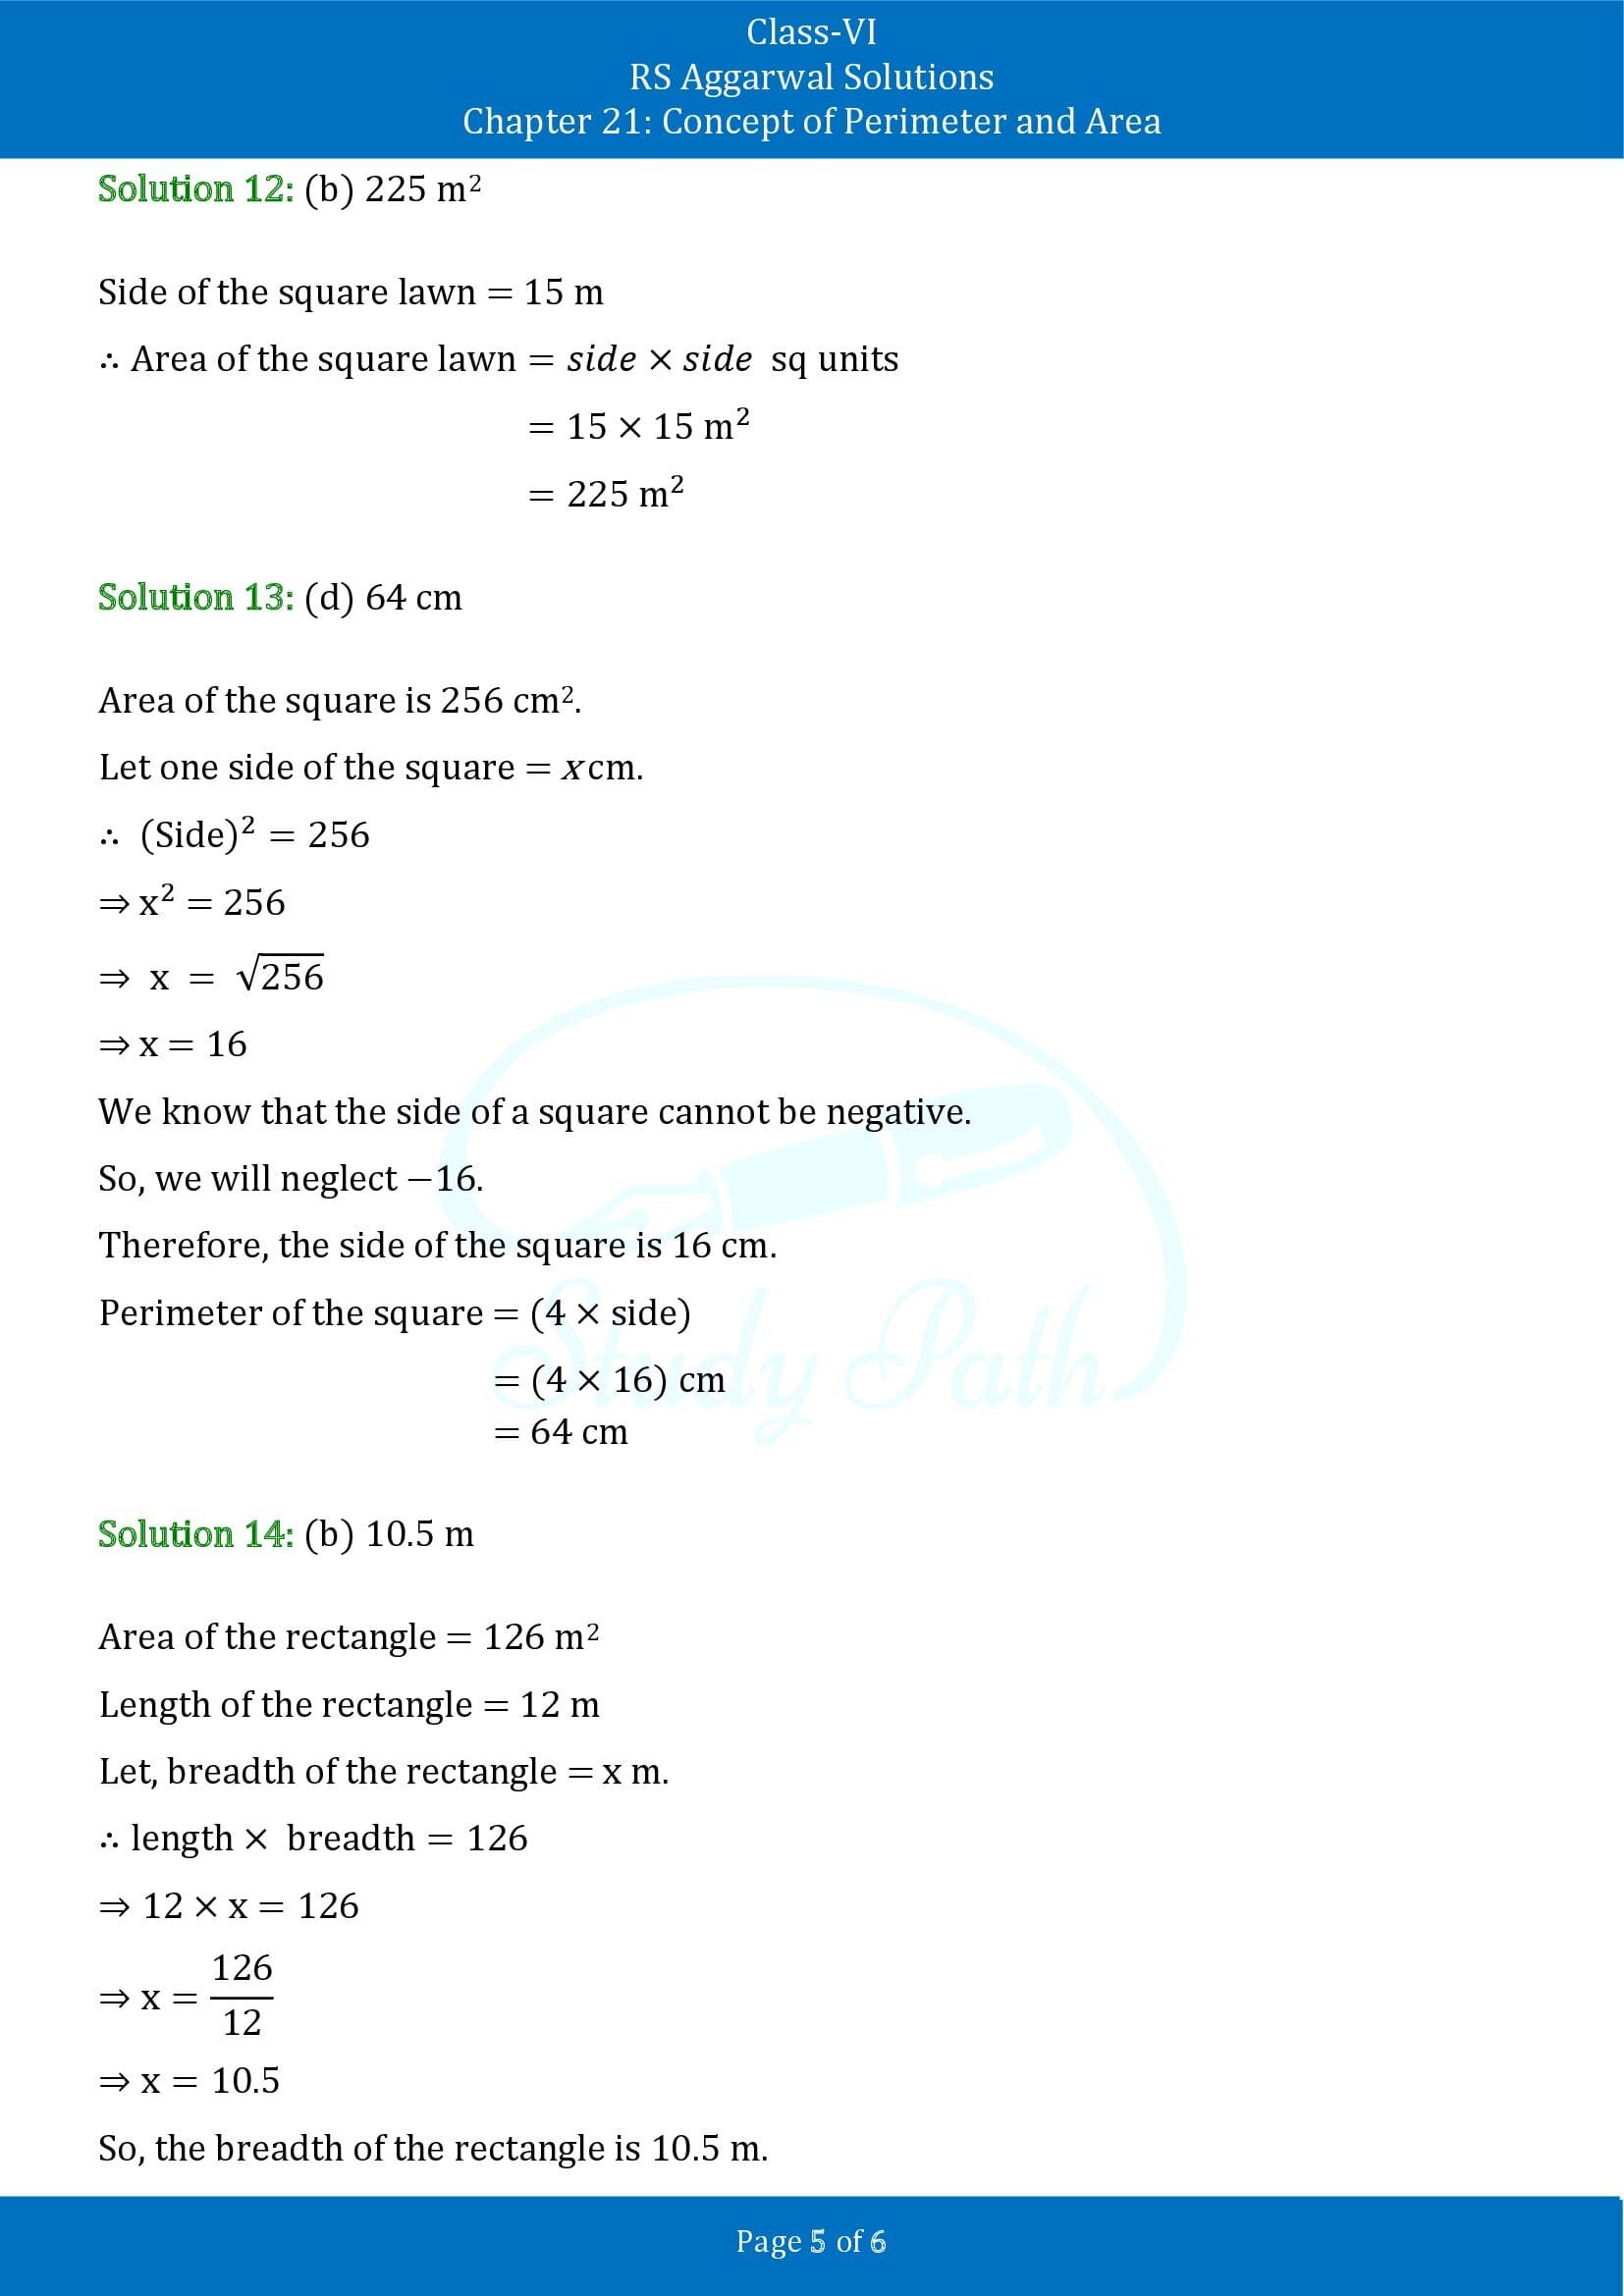 RS Aggarwal Solutions Class 6 Chapter 21 Concept of Perimeter and Area Test Paper 00005